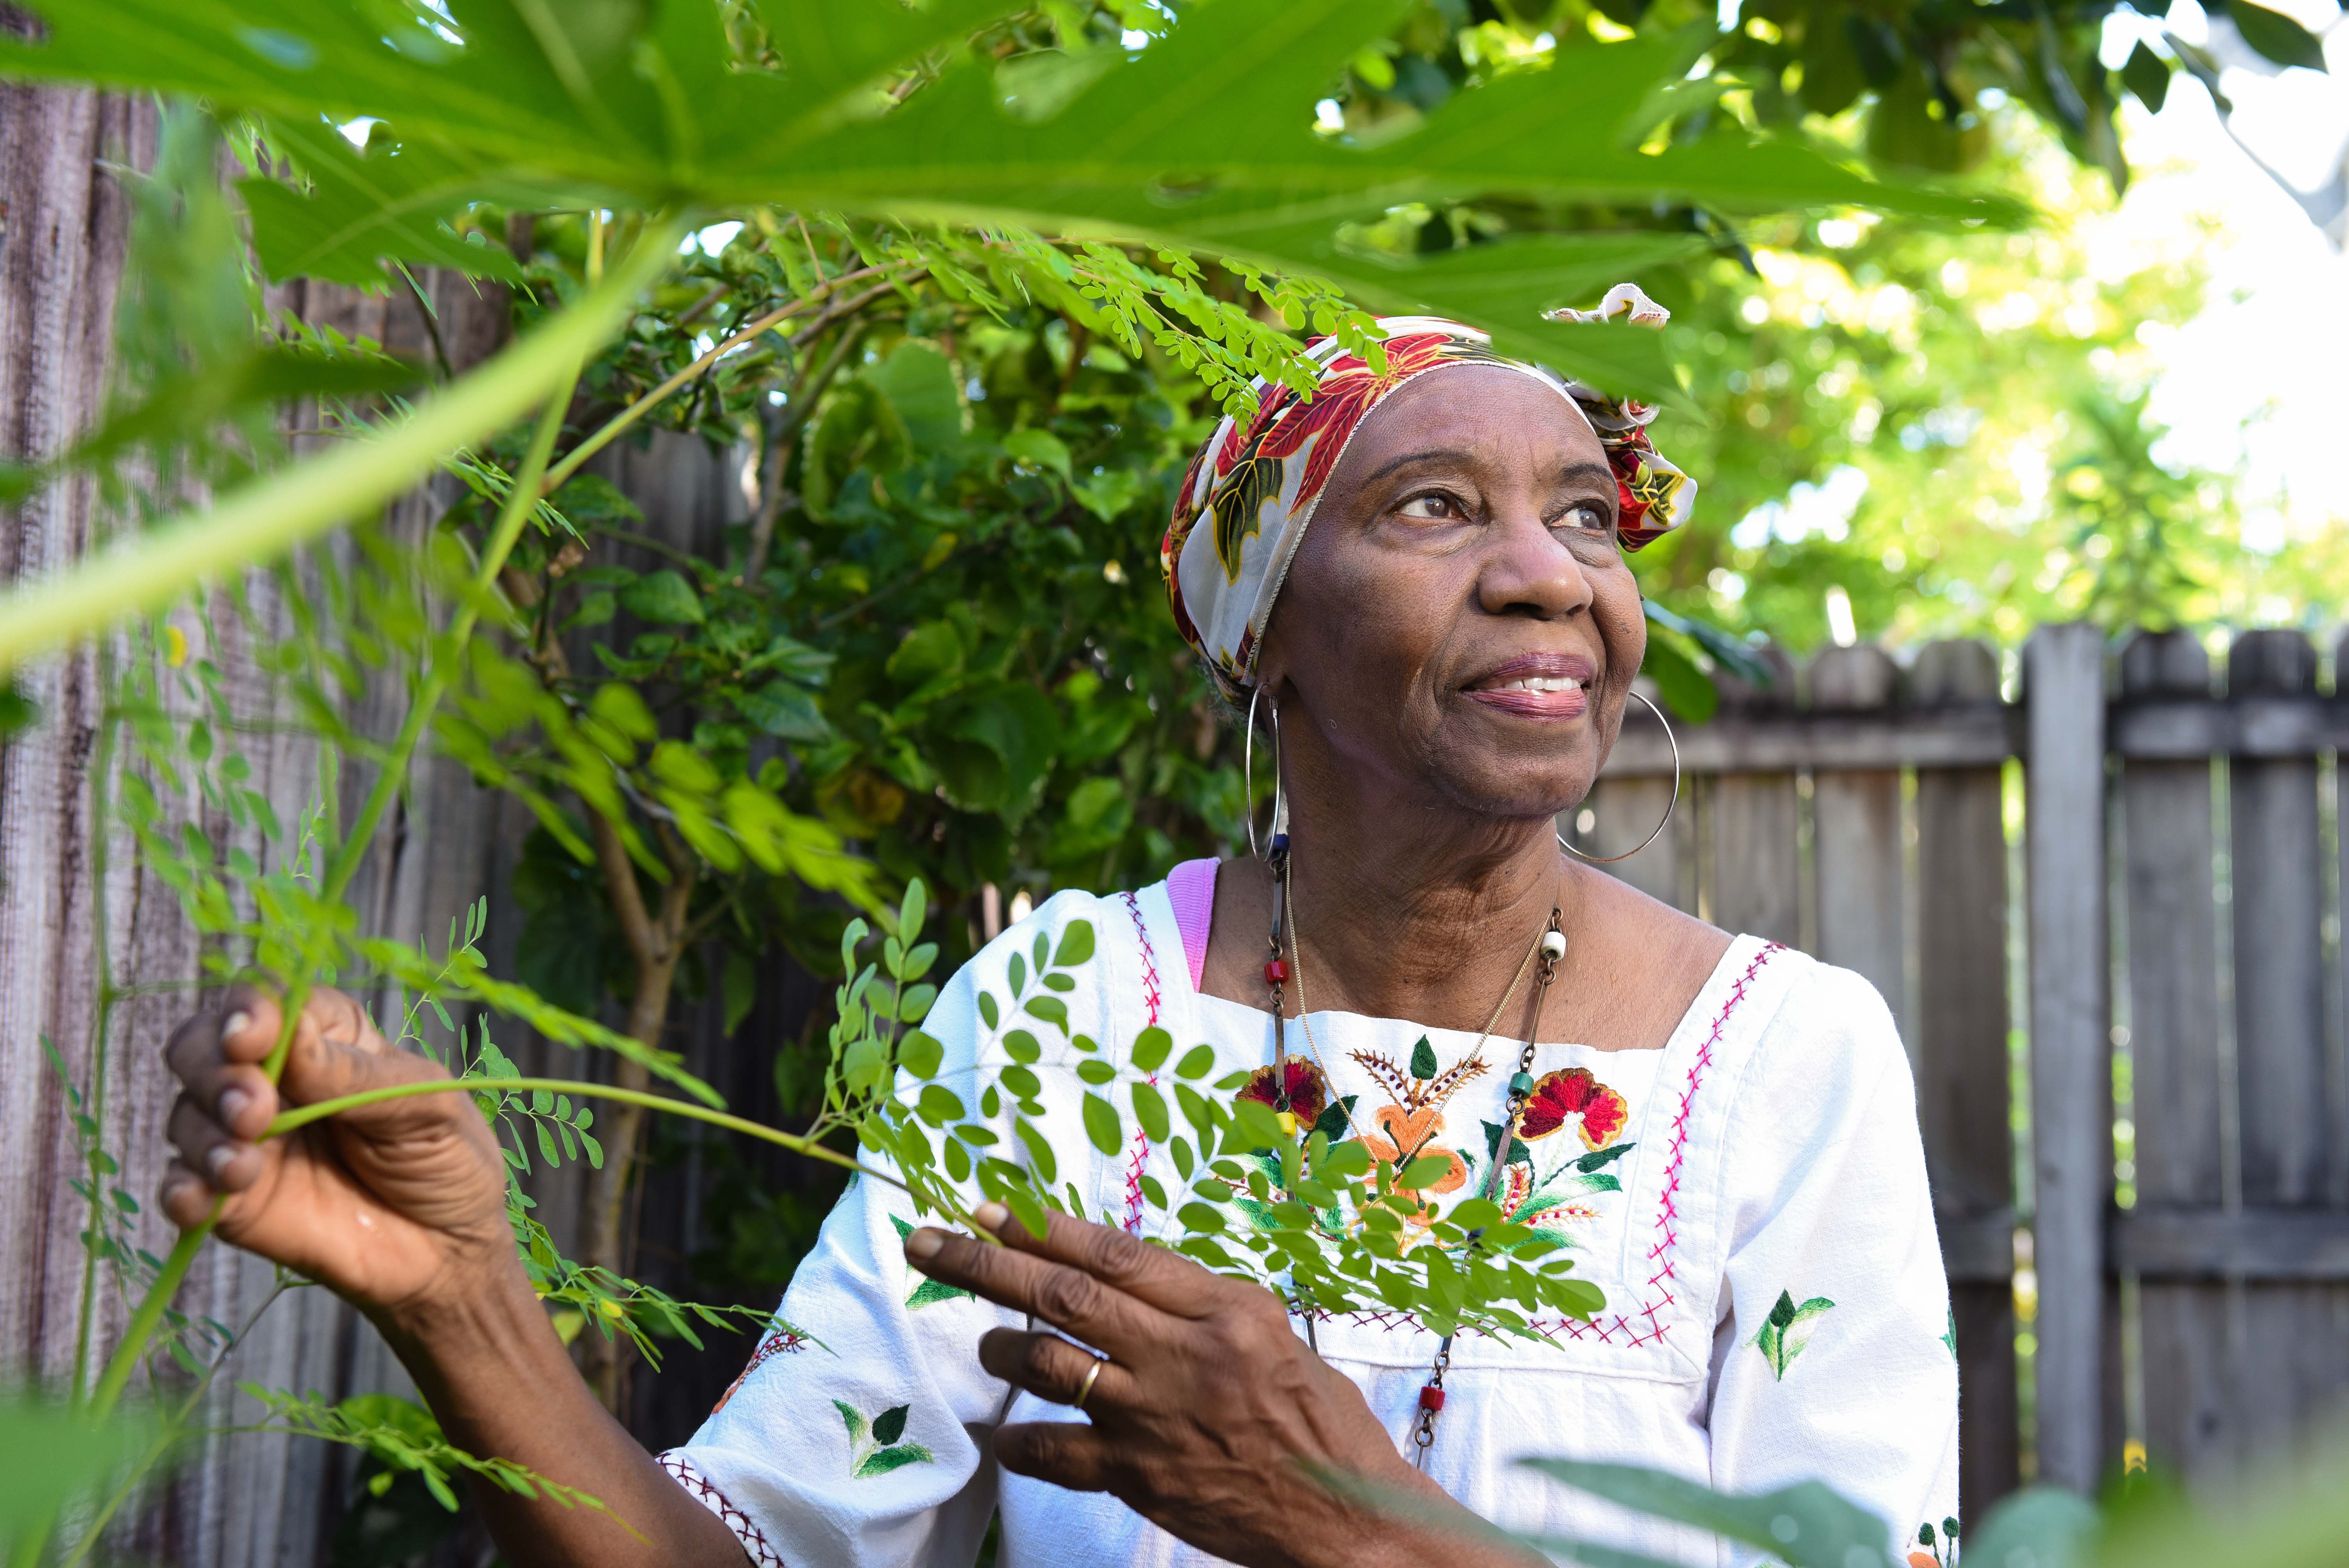 Sold-Out Traditional Medicine Workshop: Herbs and Healing in Haiti